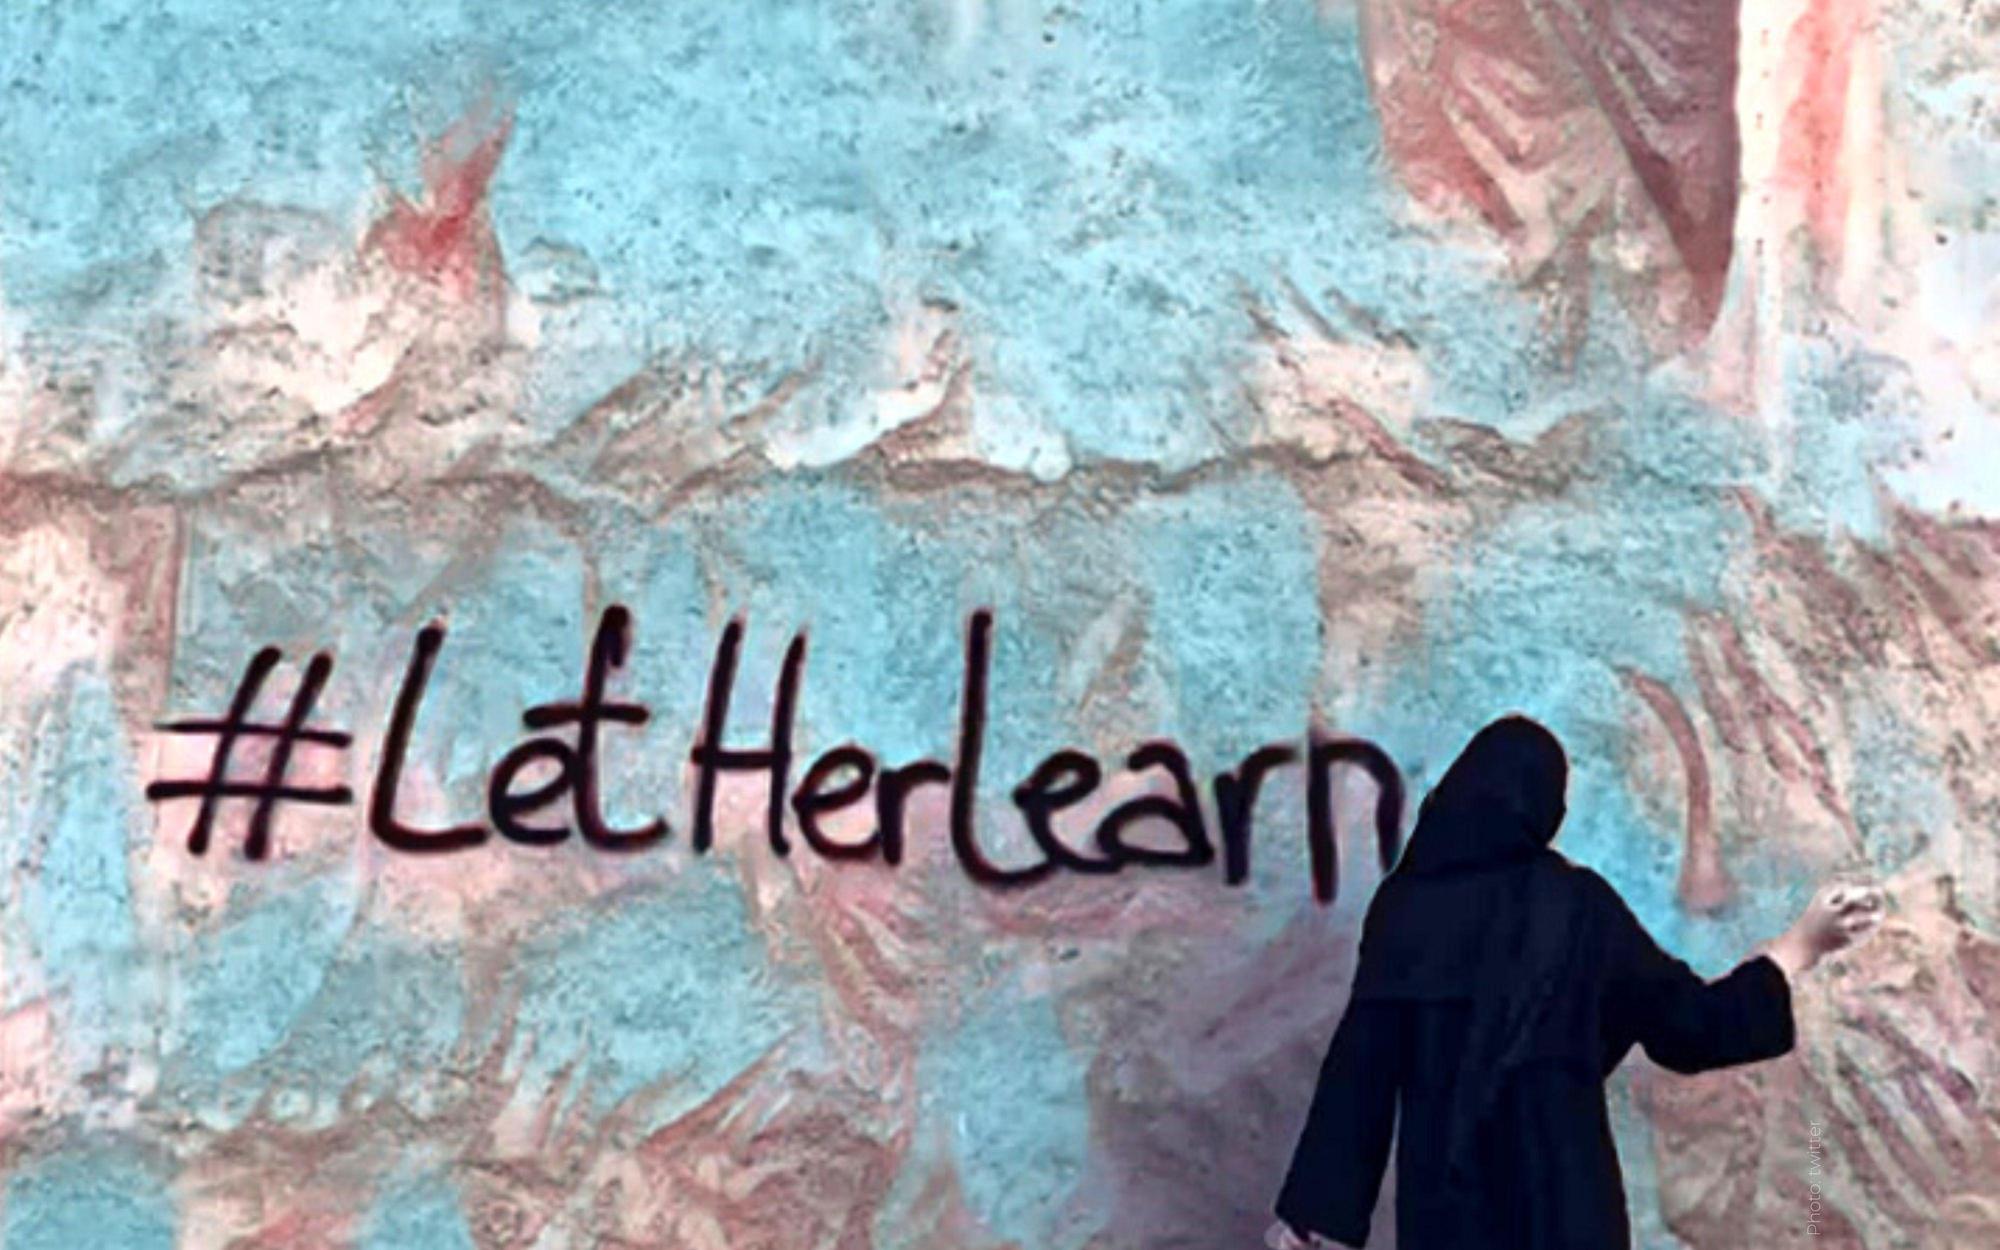 A woman is standing in front of a wall with the words `` let her learn '' written on it.